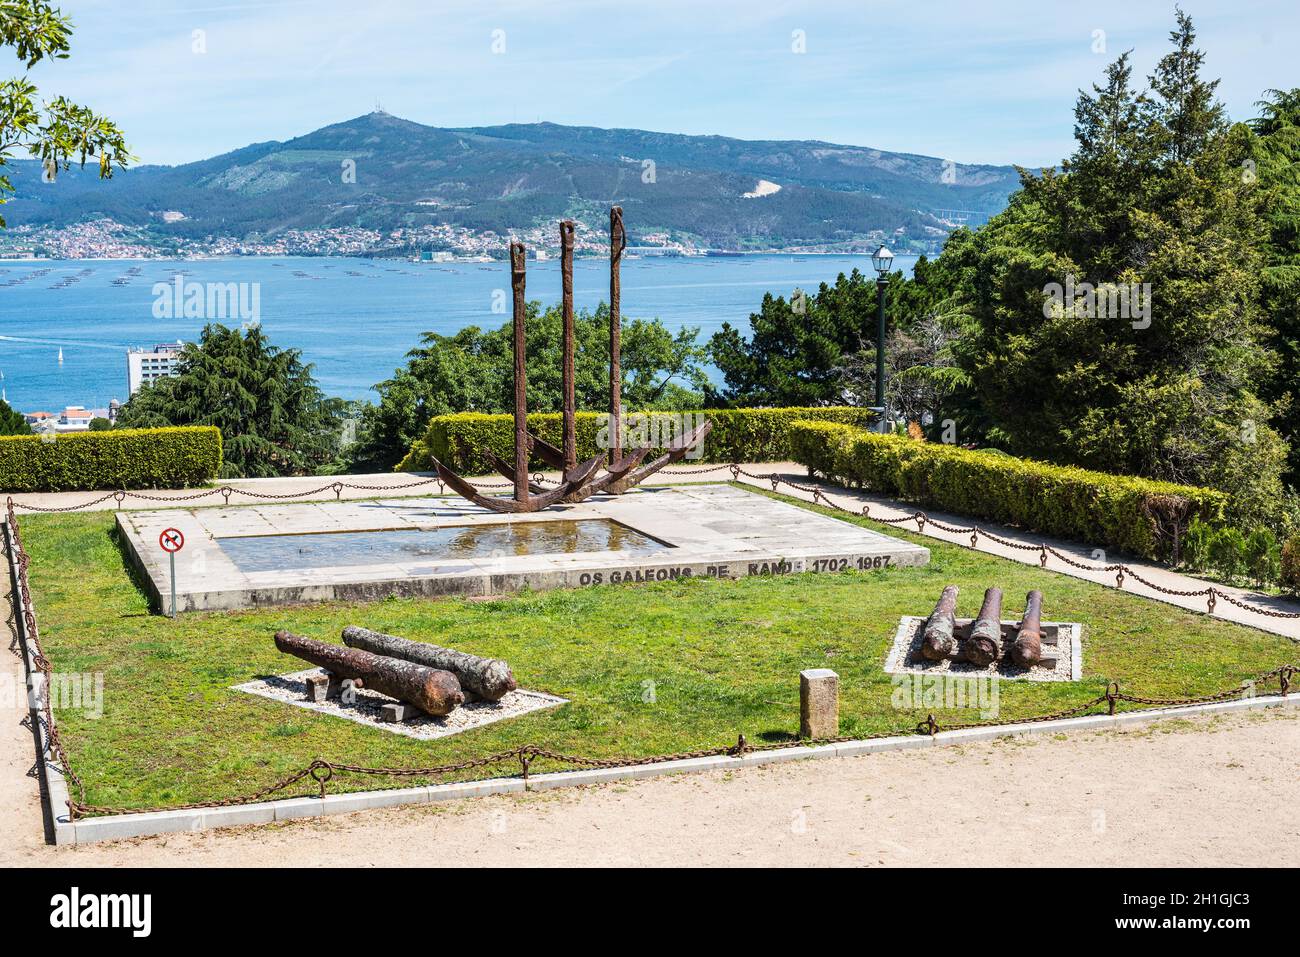 Vigo, Spain - May 20, 2017: Scenic view of five cannons and three anchors in front of bay in ancient historic spanish town Vigo in Galicia, Spain. Stock Photo